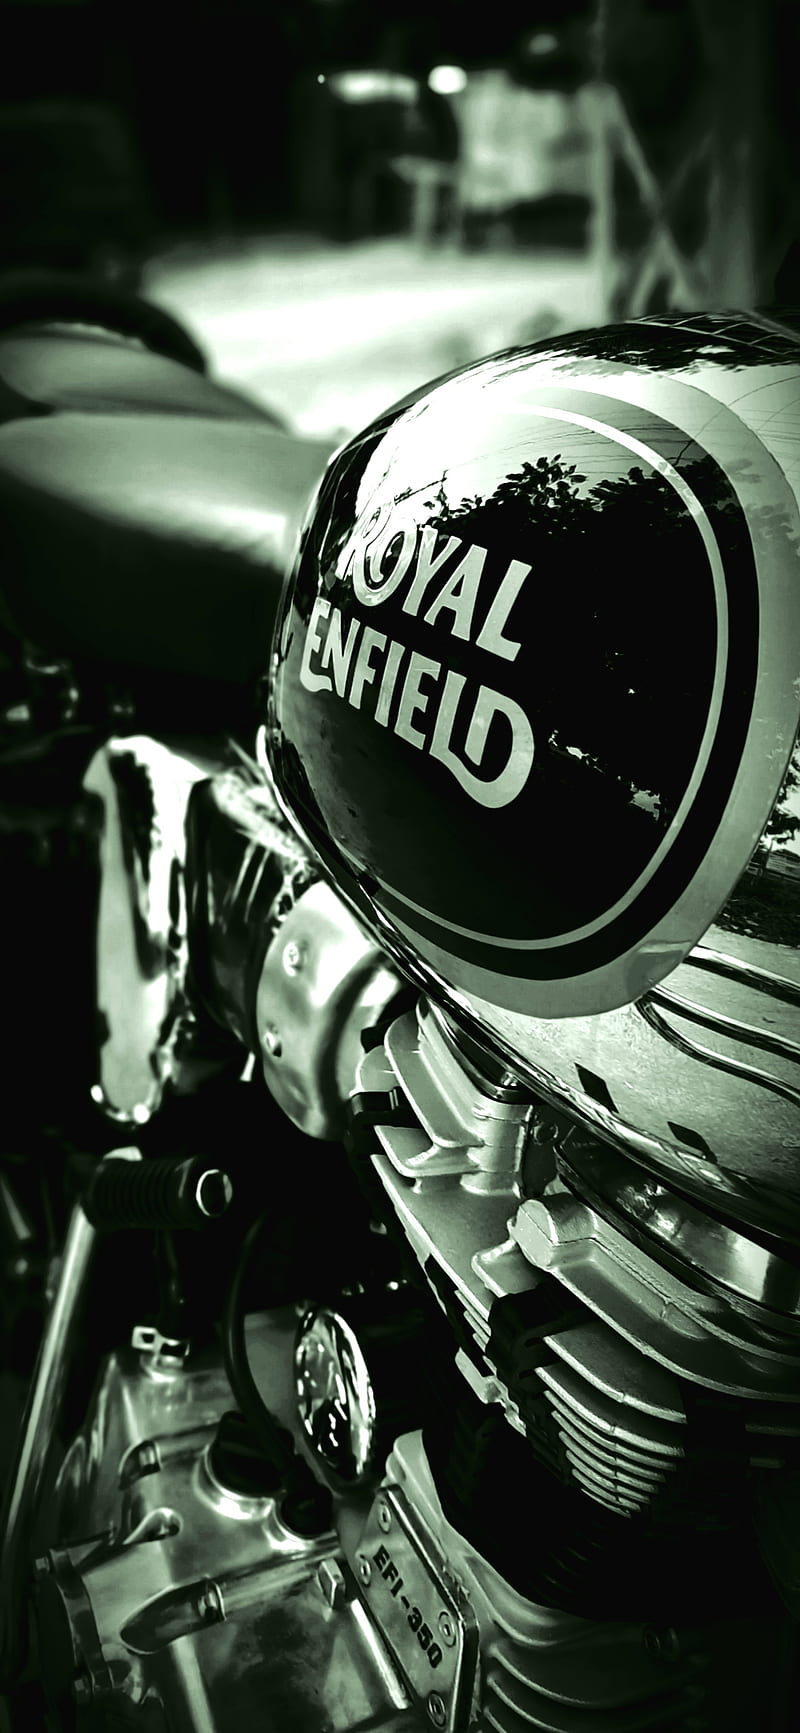 Royal enfield, black and white, HD phone wallpaper | Peakpx